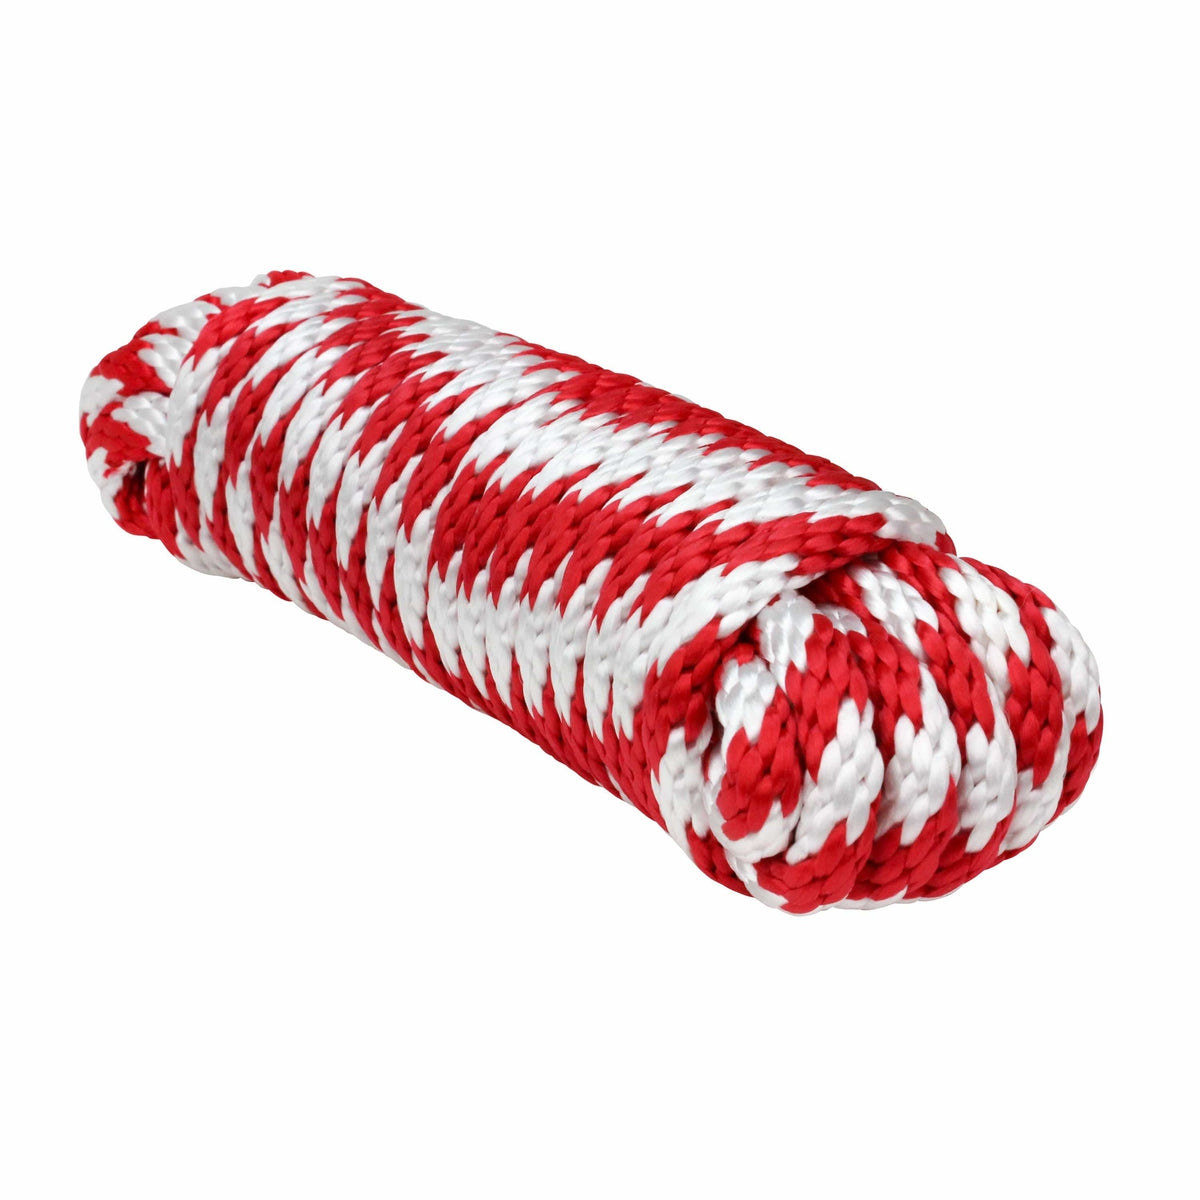 Extreme Max Solid Braid MFP Utility Rope 3/8" 50' Red/White #3008.0163